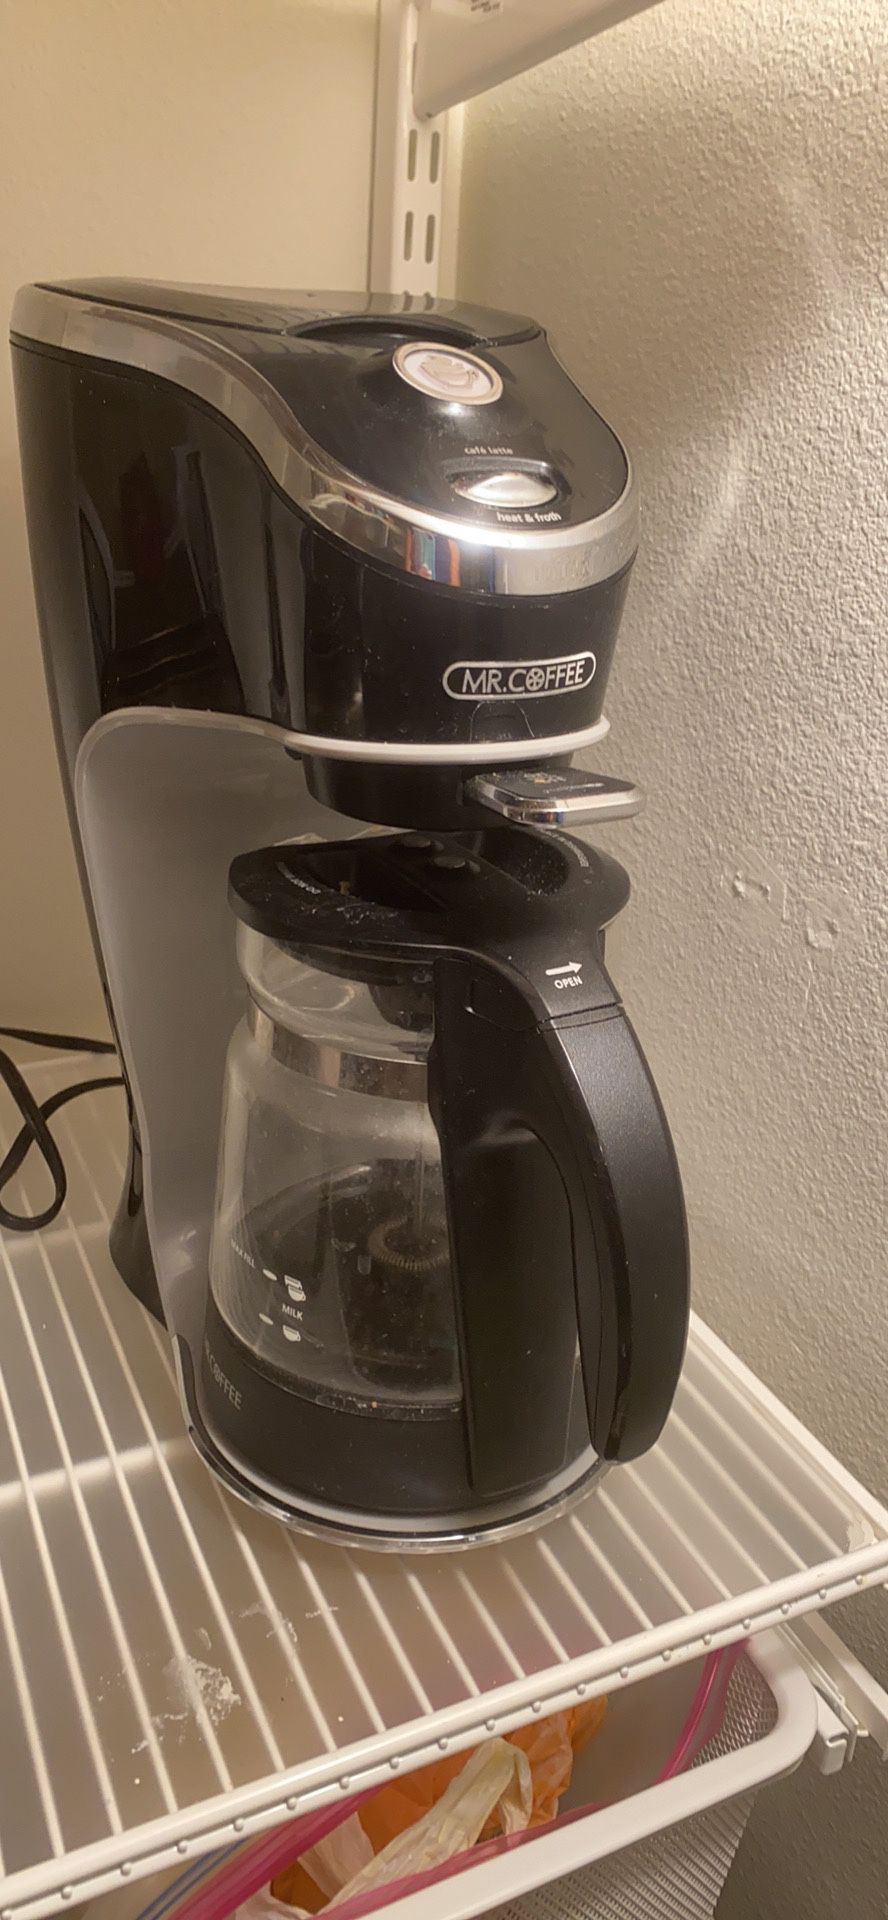 Mr Coffee Latte Maker for Sale in Issaquah, WA - OfferUp